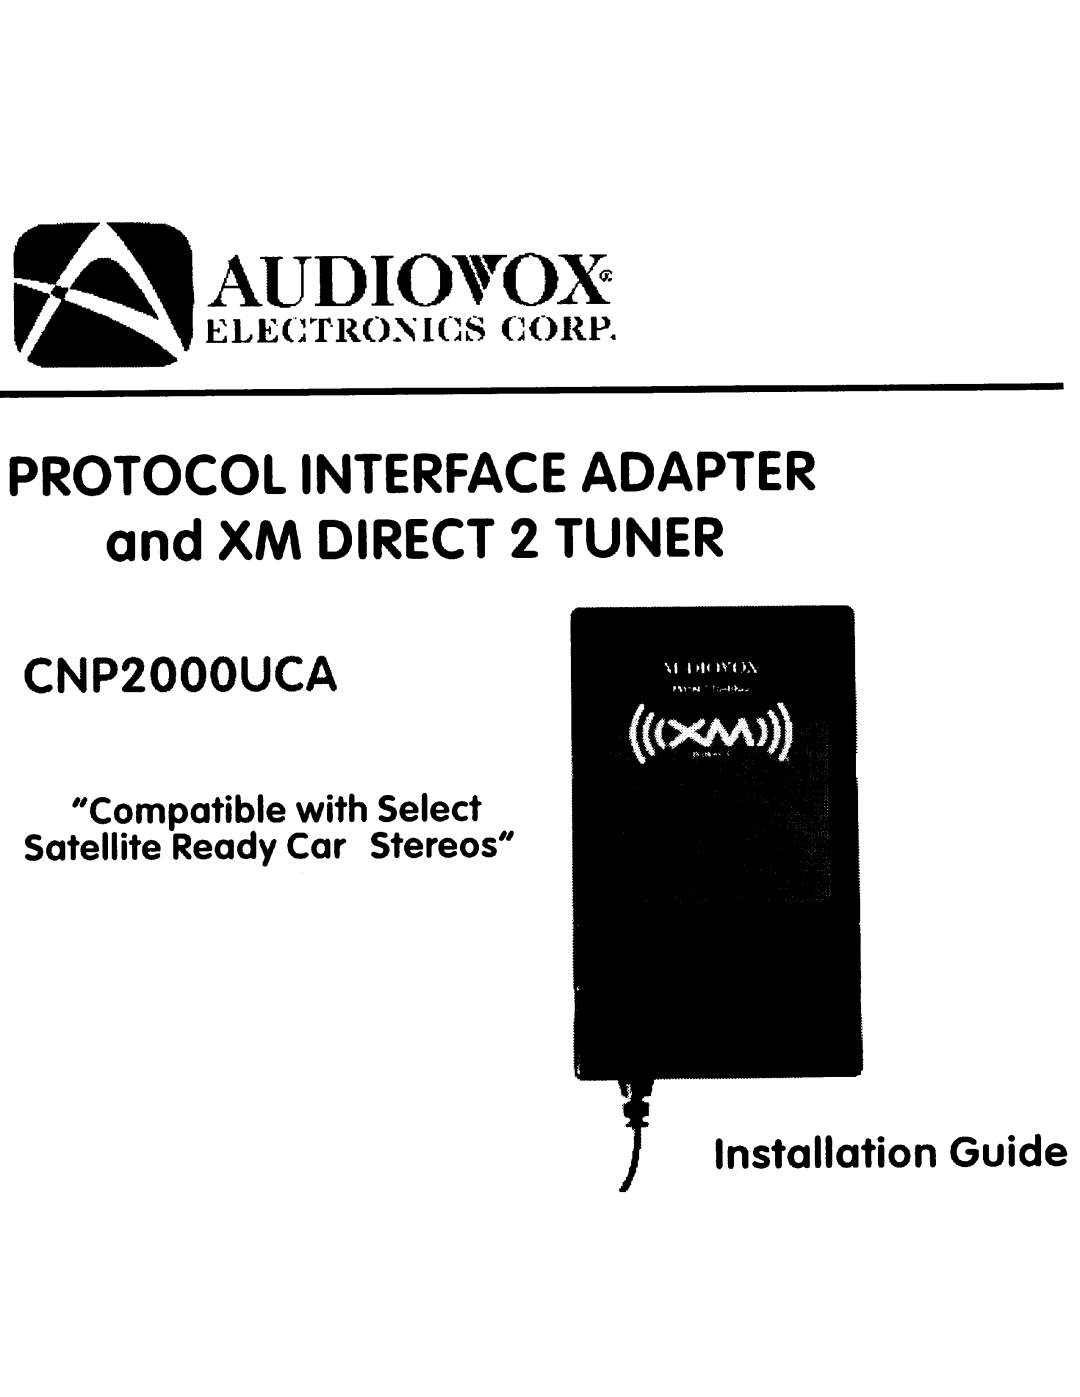 Audiovox CNP2000UCA manual PROTOCOL INTERFACE ADAPTER and XM DIRECT 2 TUNER, Installation Guide 